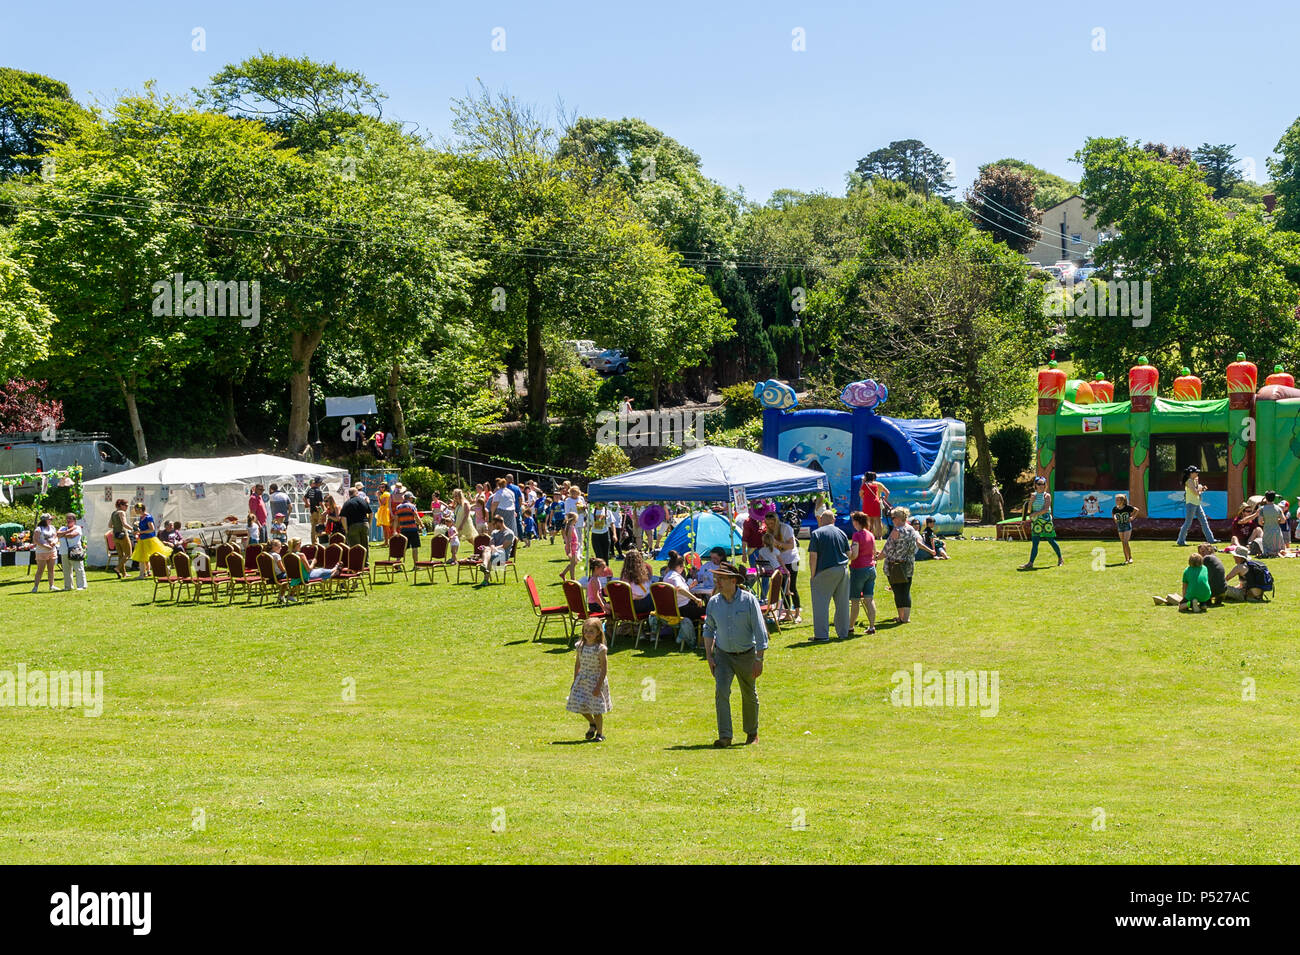 Bantry, Ireland. 24th June, 2018. Bumbleance - the Official Children's National Ambulance Service of Ireland is a crucial service for sick children. A fundraiser was held at Westlodge Hotel, Bantry today in scorching sunshine with Alice in Wonderland being the fancy dress theme. Credit: Andy Gibson/Alamy Live News. Stock Photo